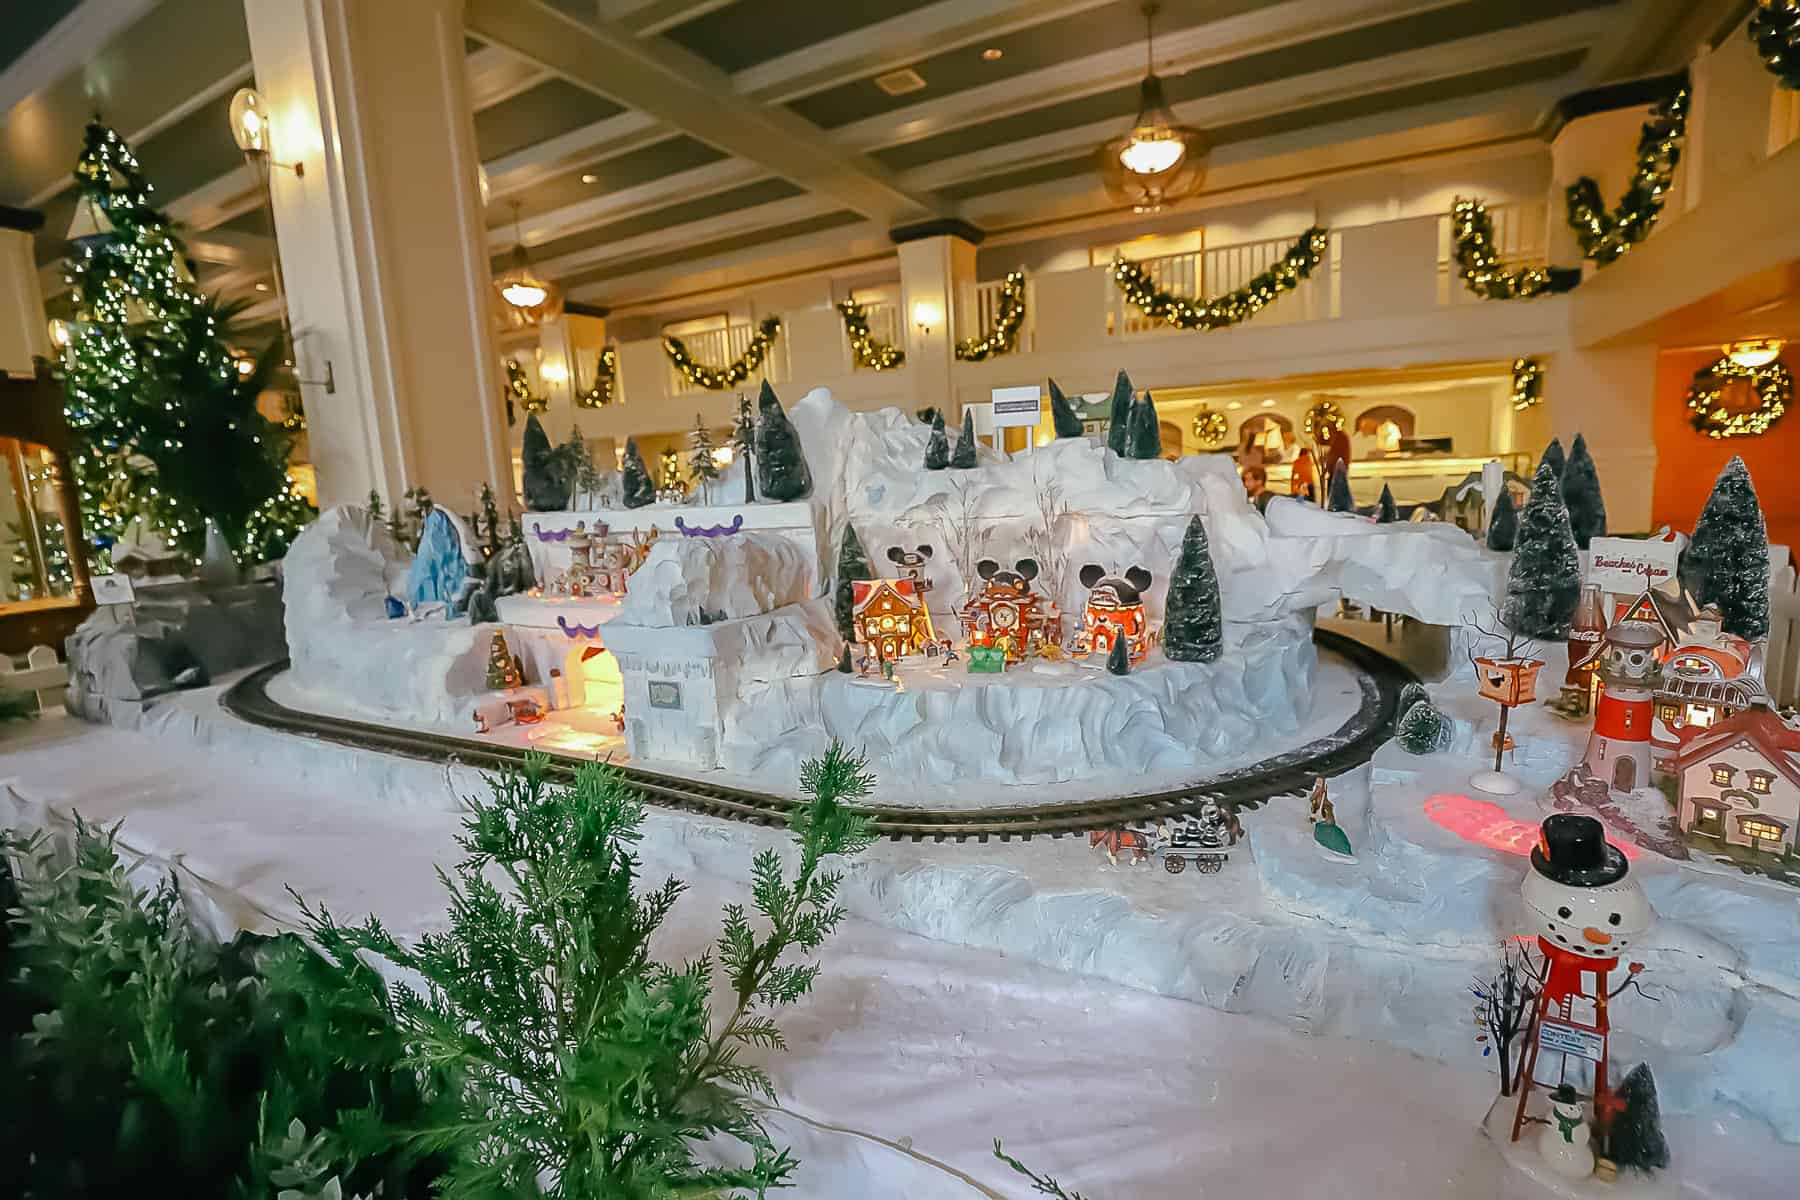 A Christmas village with train set